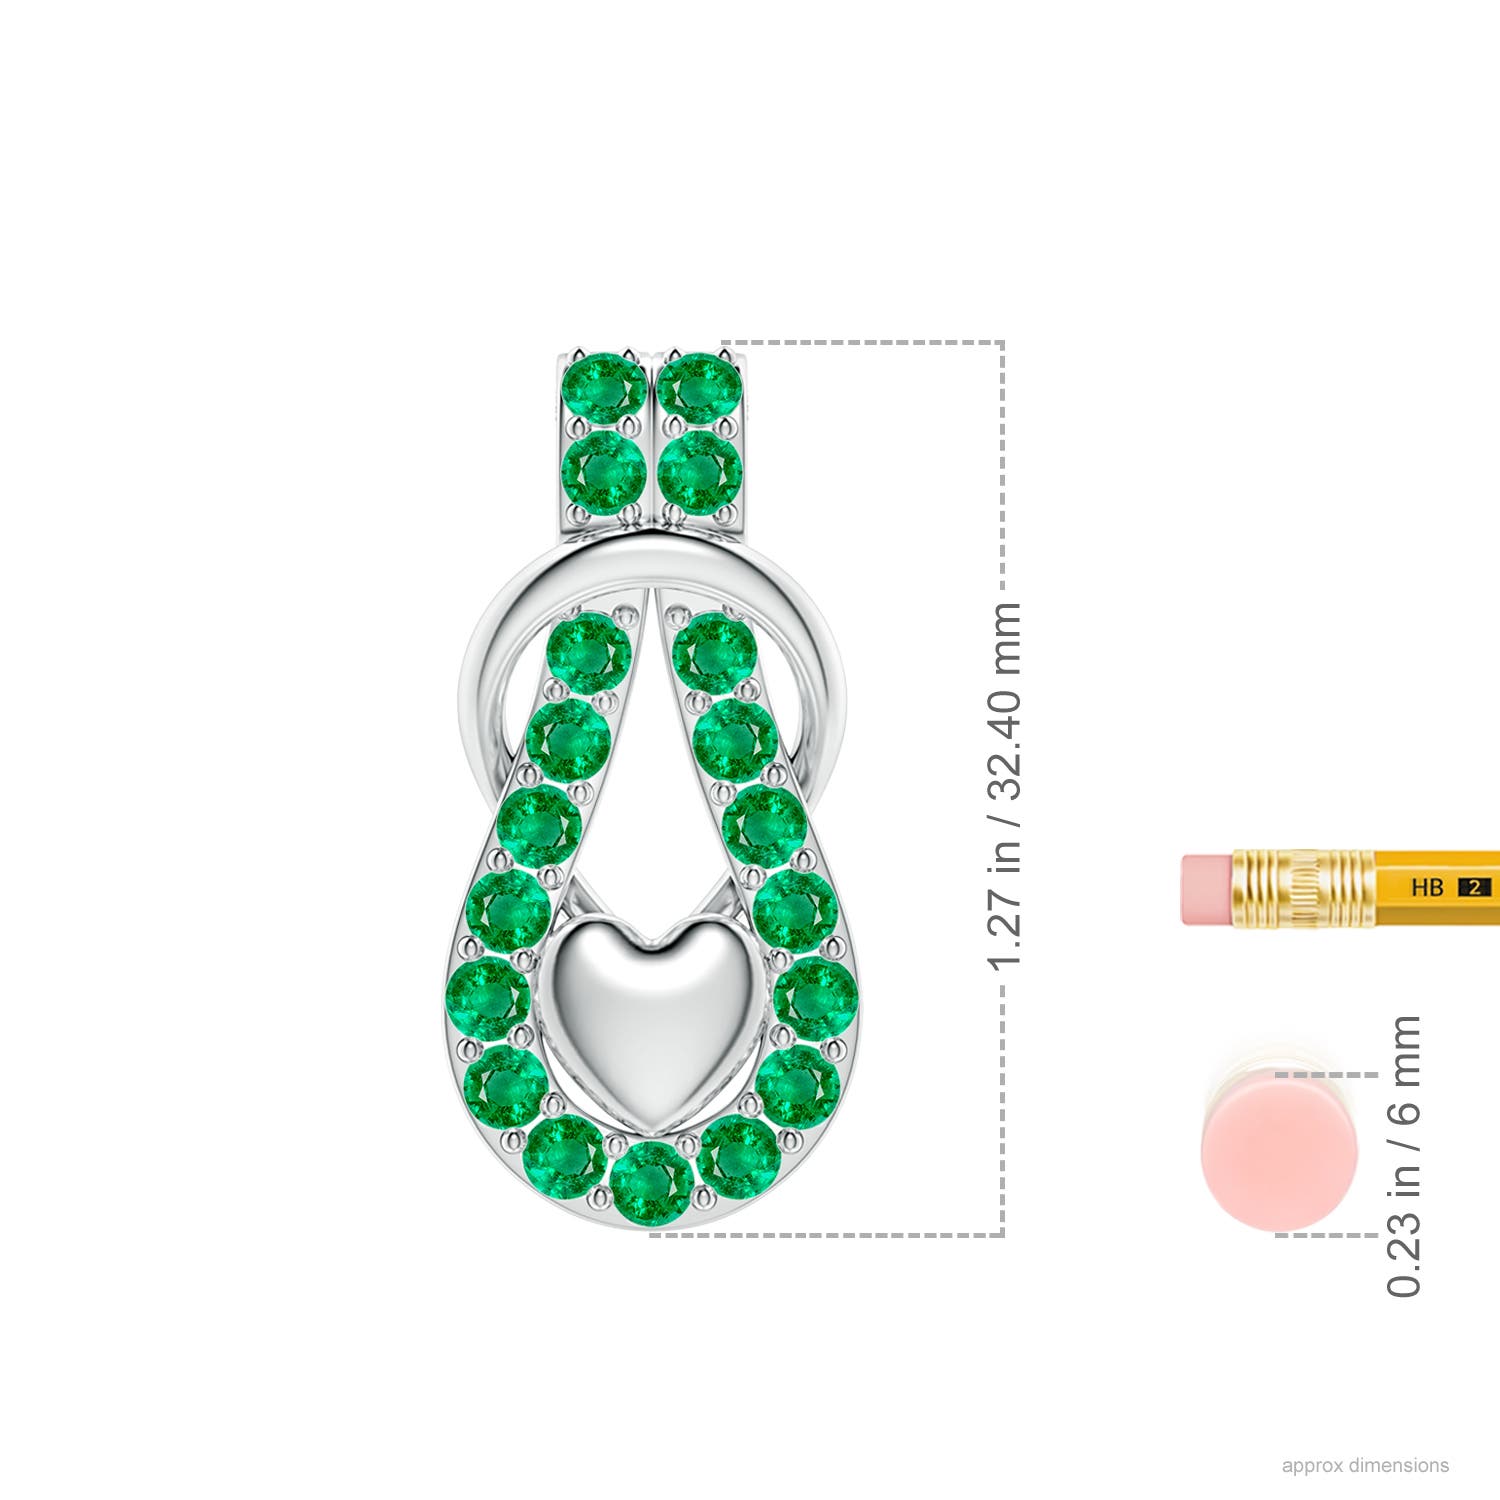 AAA - Emerald / 1.9 CT / 18 KT White Gold